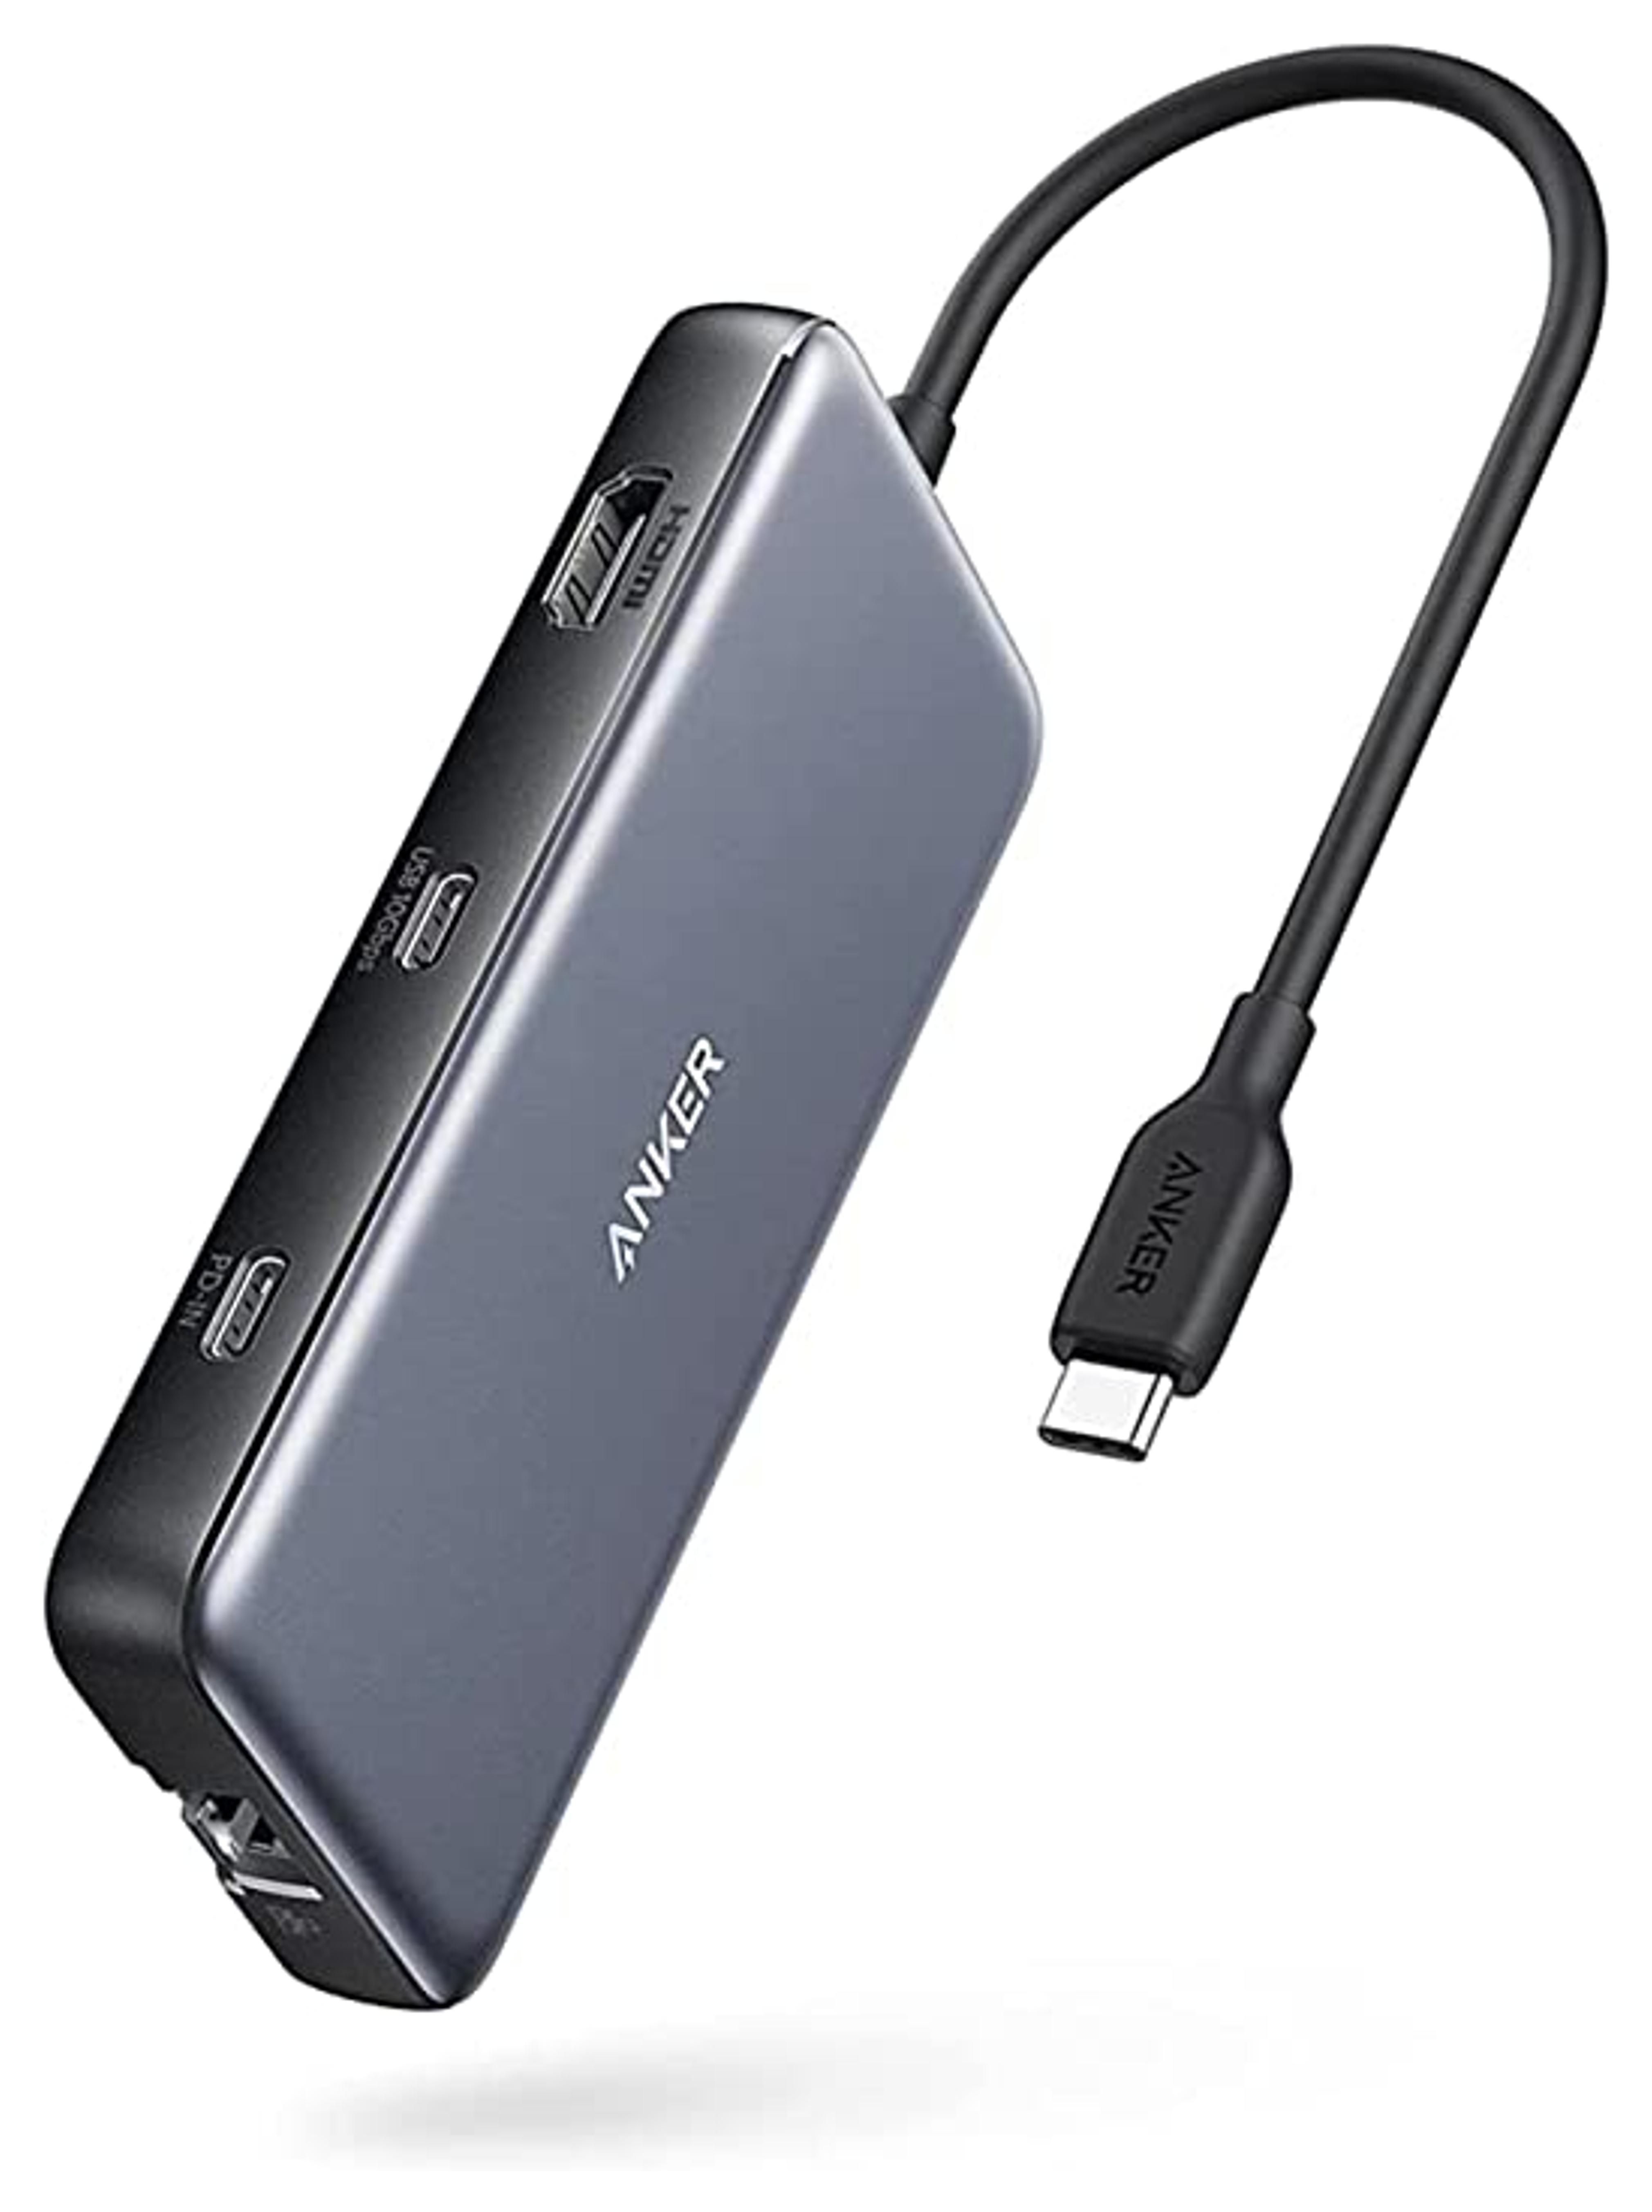 Amazon.com: Anker USB C Hub, 555 USB-C Hub (8-in-1), with 100W Power Delivery, 4K 60Hz HDMI Port, 10Gbps USB C and 2 USB A Data Ports, Ethernet Port, microSD and SD Card Reader, for MacBook Pro and More : Electronics